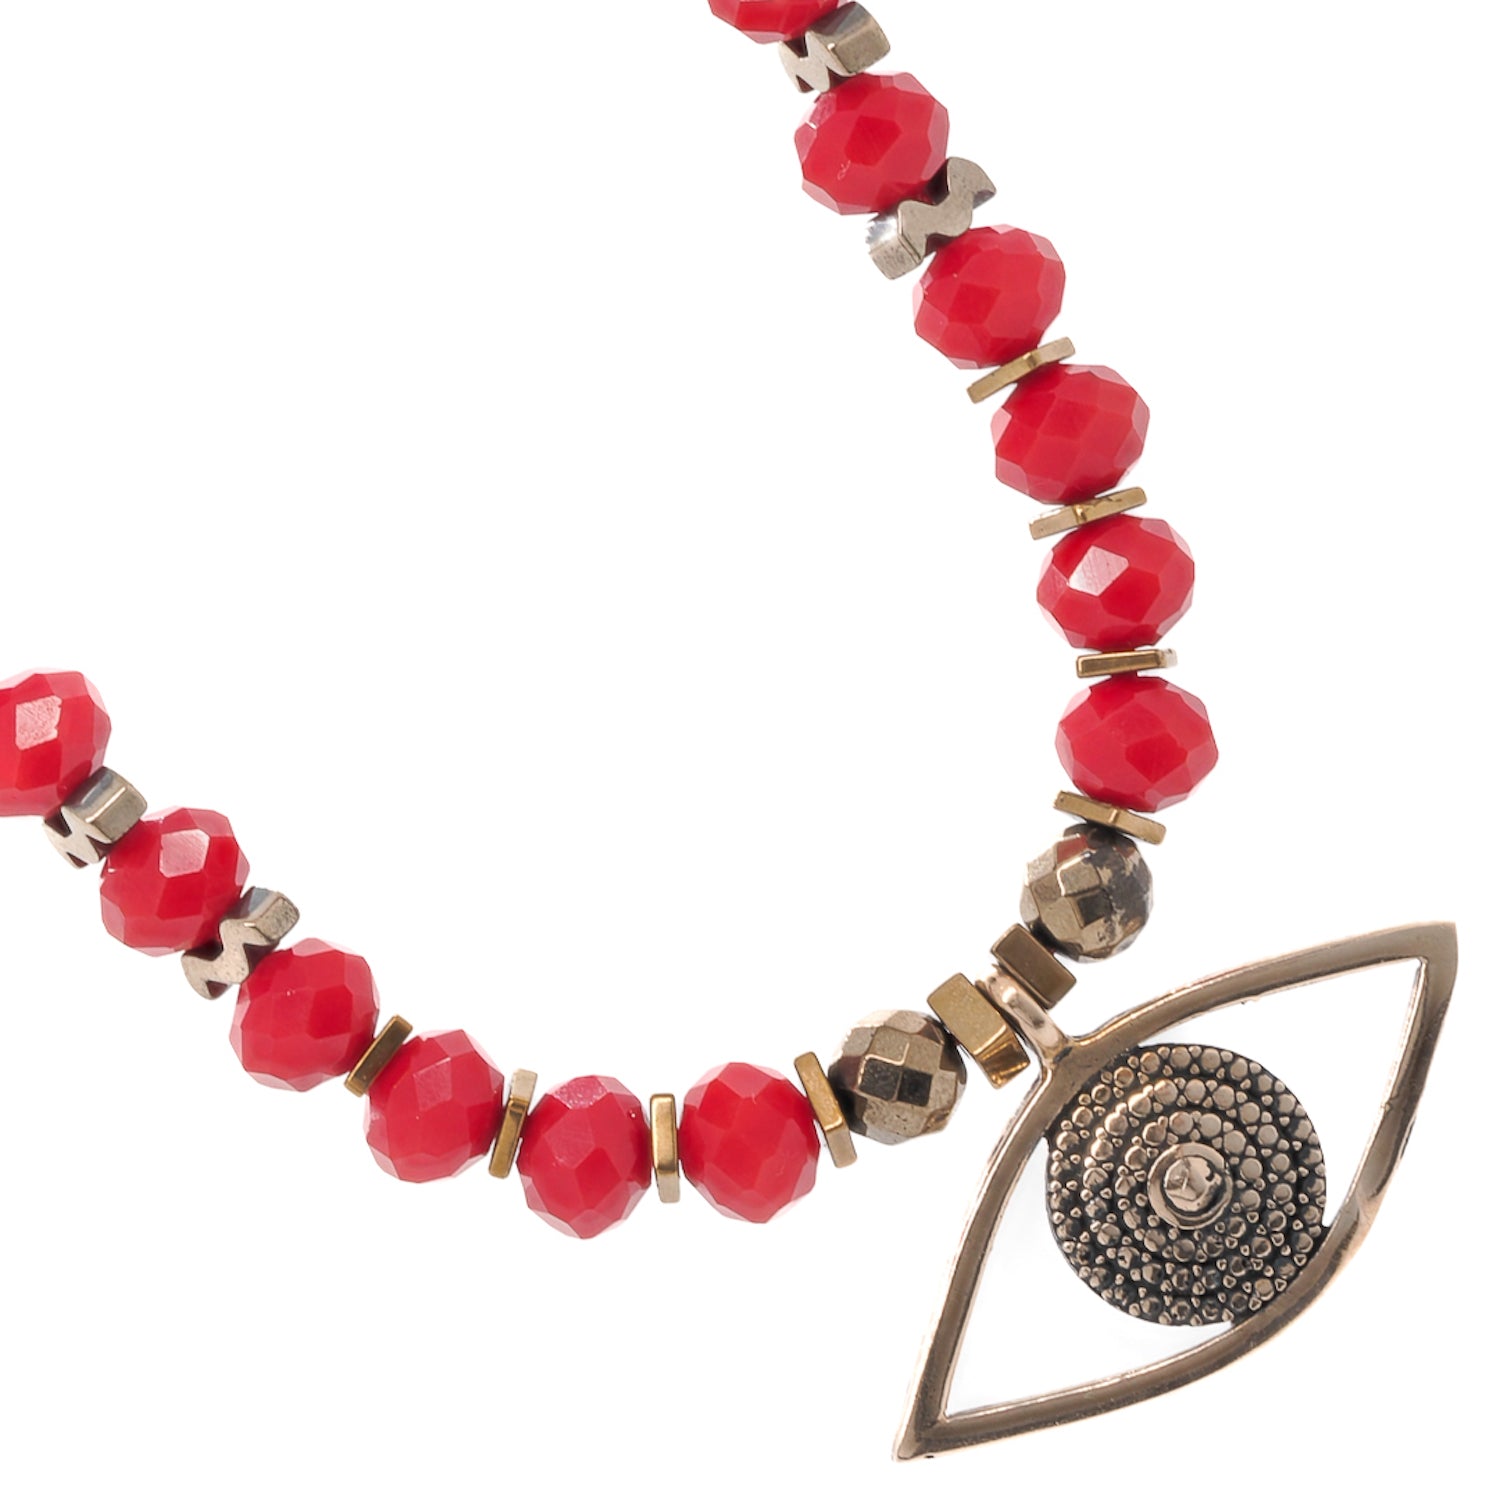 Unique Christmas Evil Eye Necklace adorned with red crystal beads and a gold hematite stone, perfect for the holiday season.